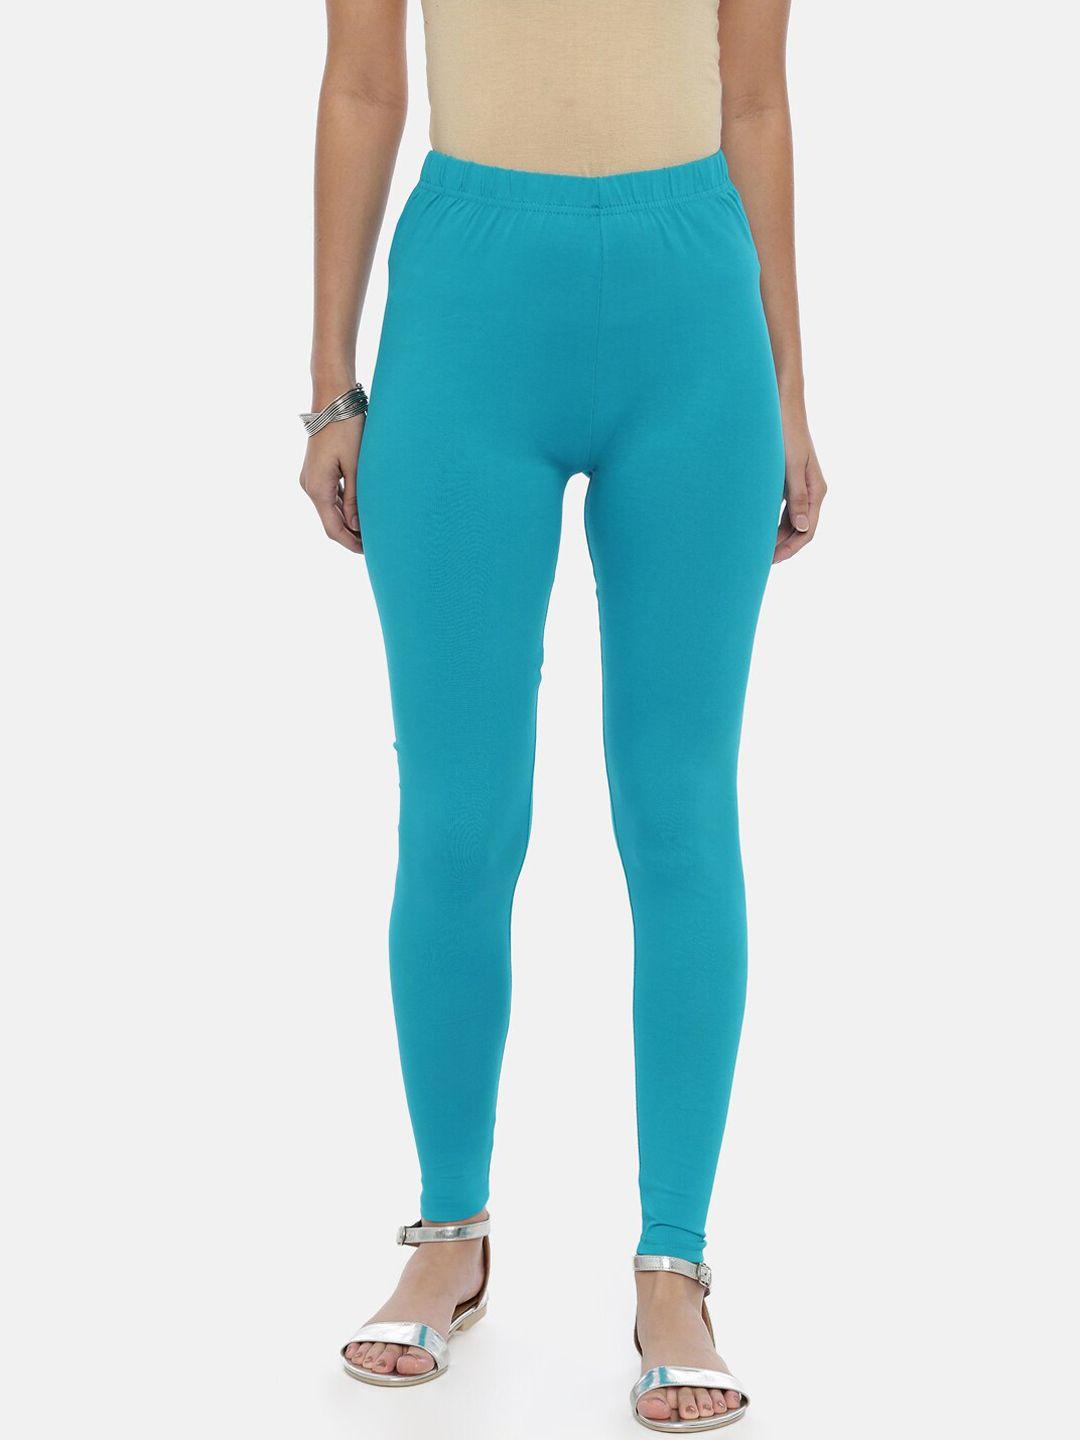 souchii-women-turquoise-blue-solid-slim-fit-ankle-length-leggings